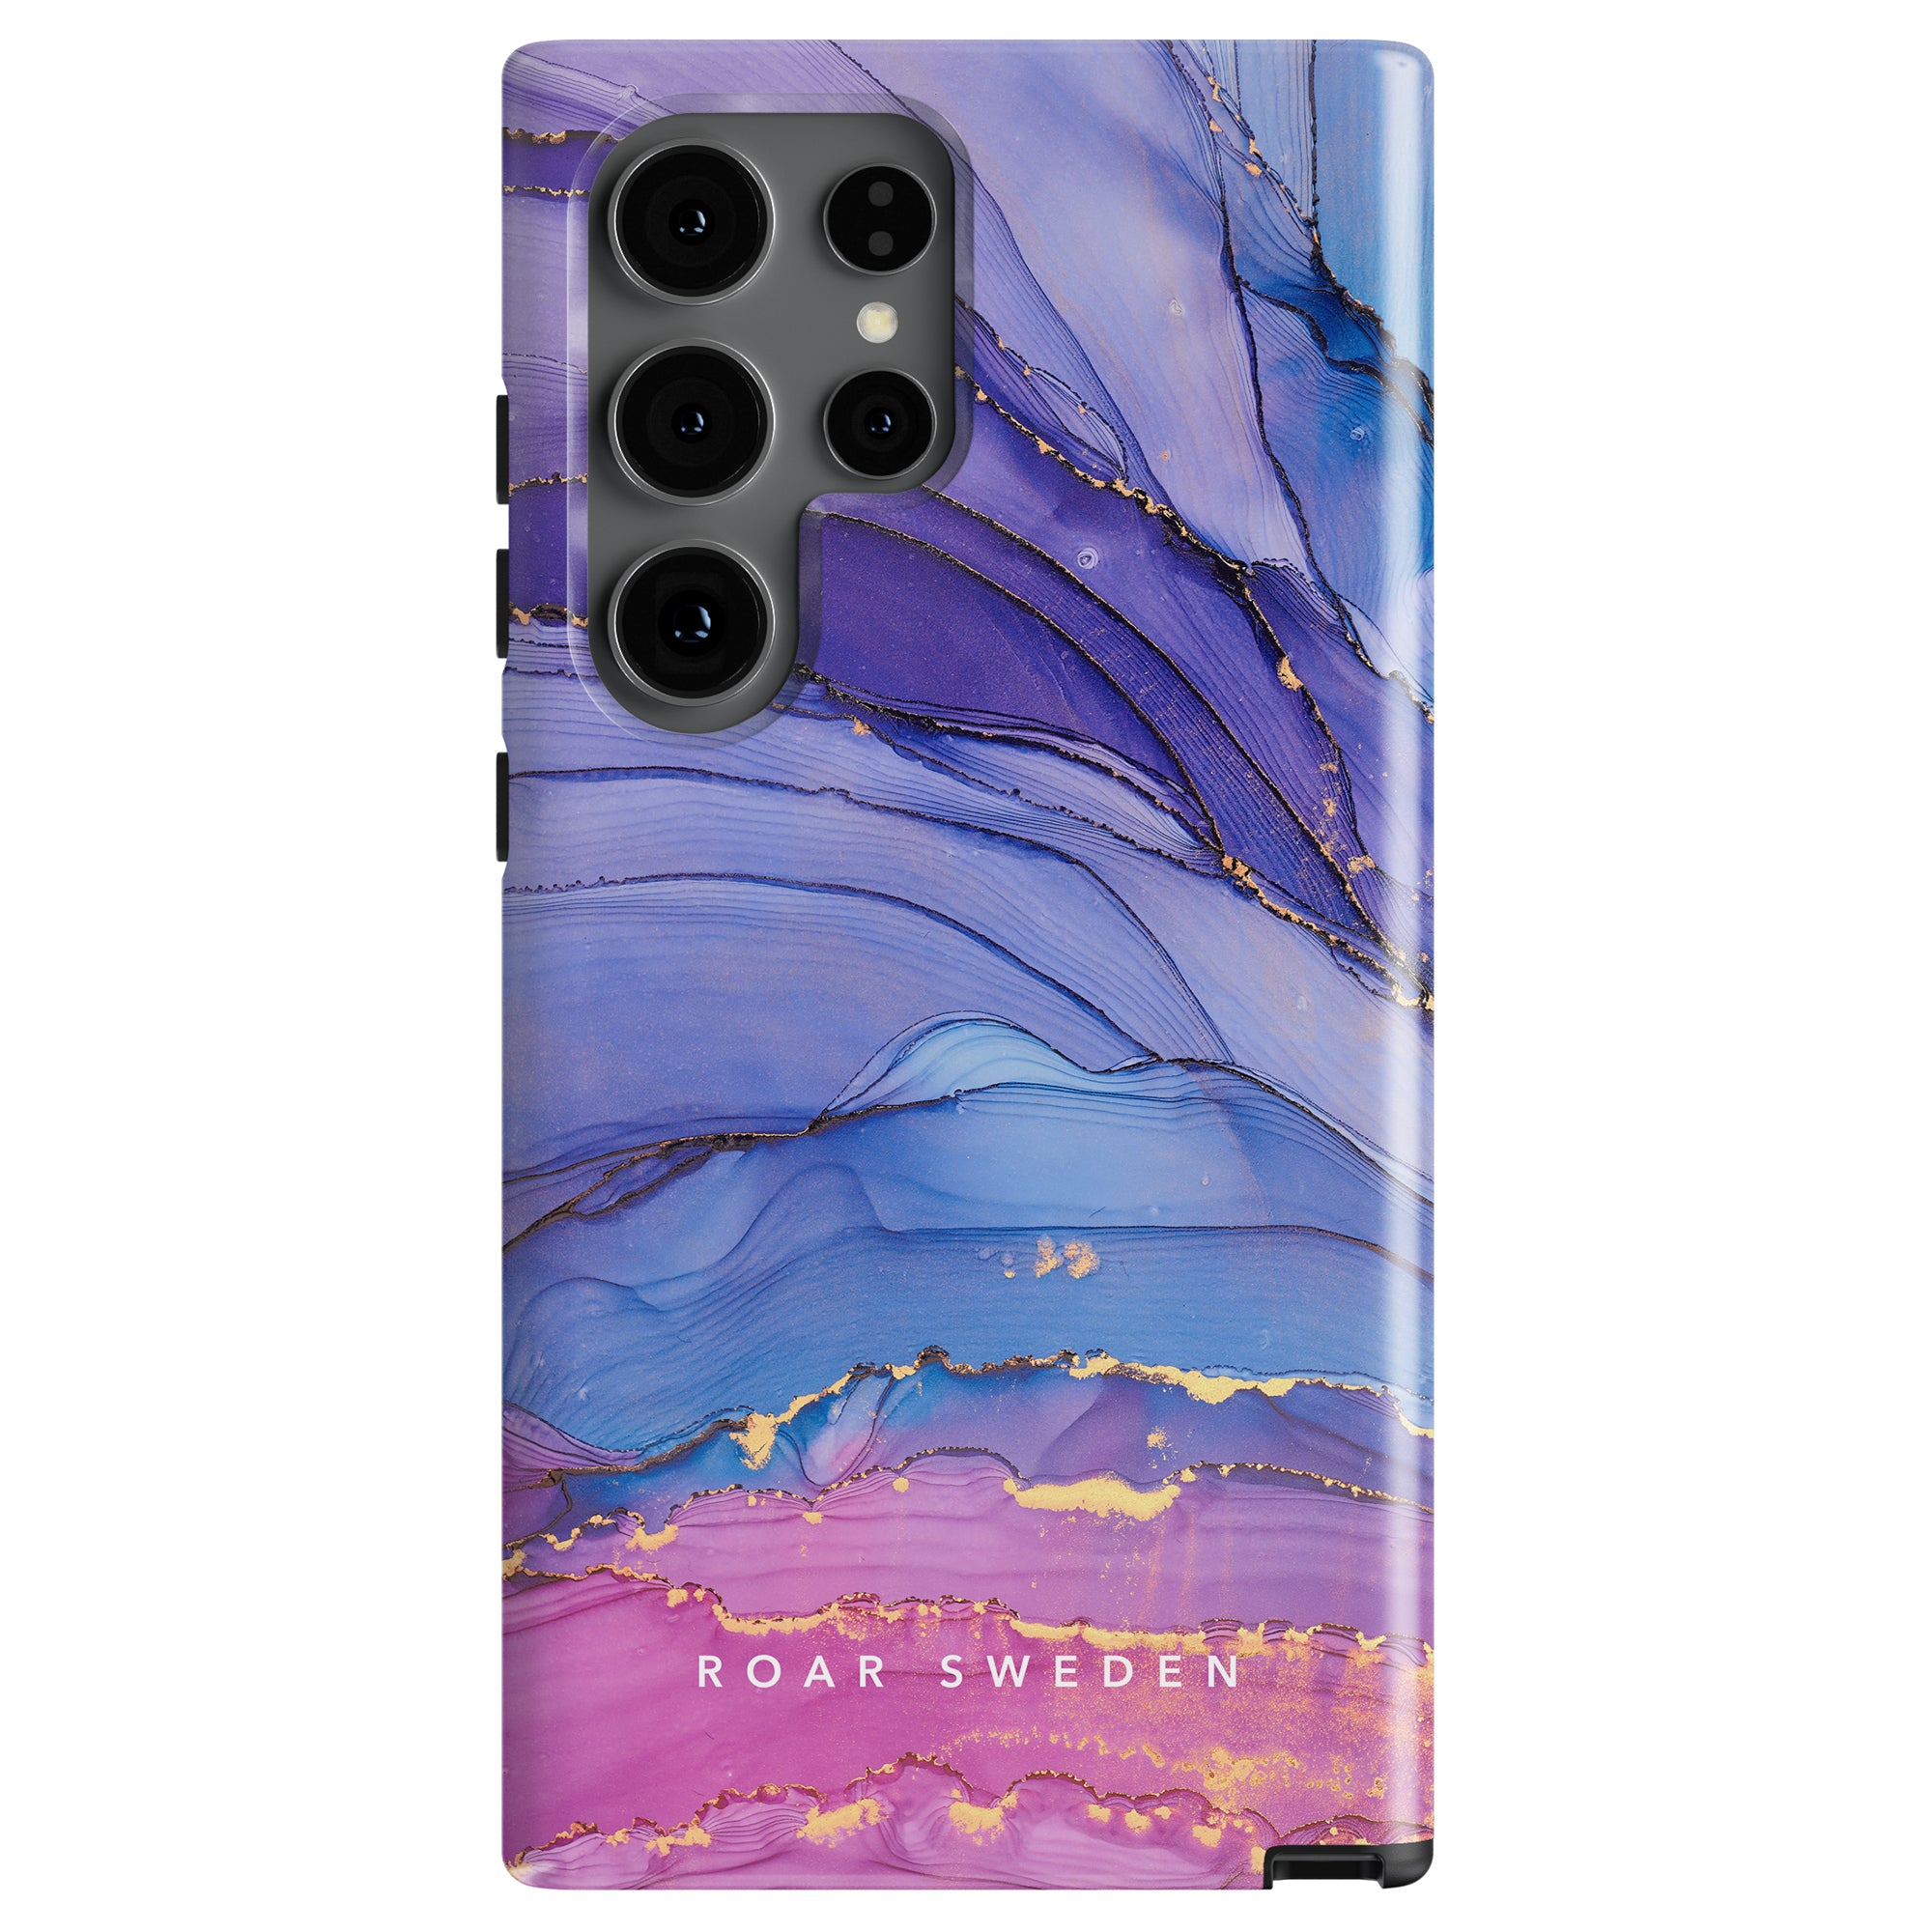 A smartphone with a Dreamy - Tough case featuring an abstract design in shades of purple, blue, and pink. "Roar Sweden" is written at the bottom. The phone has multiple cameras on the back.